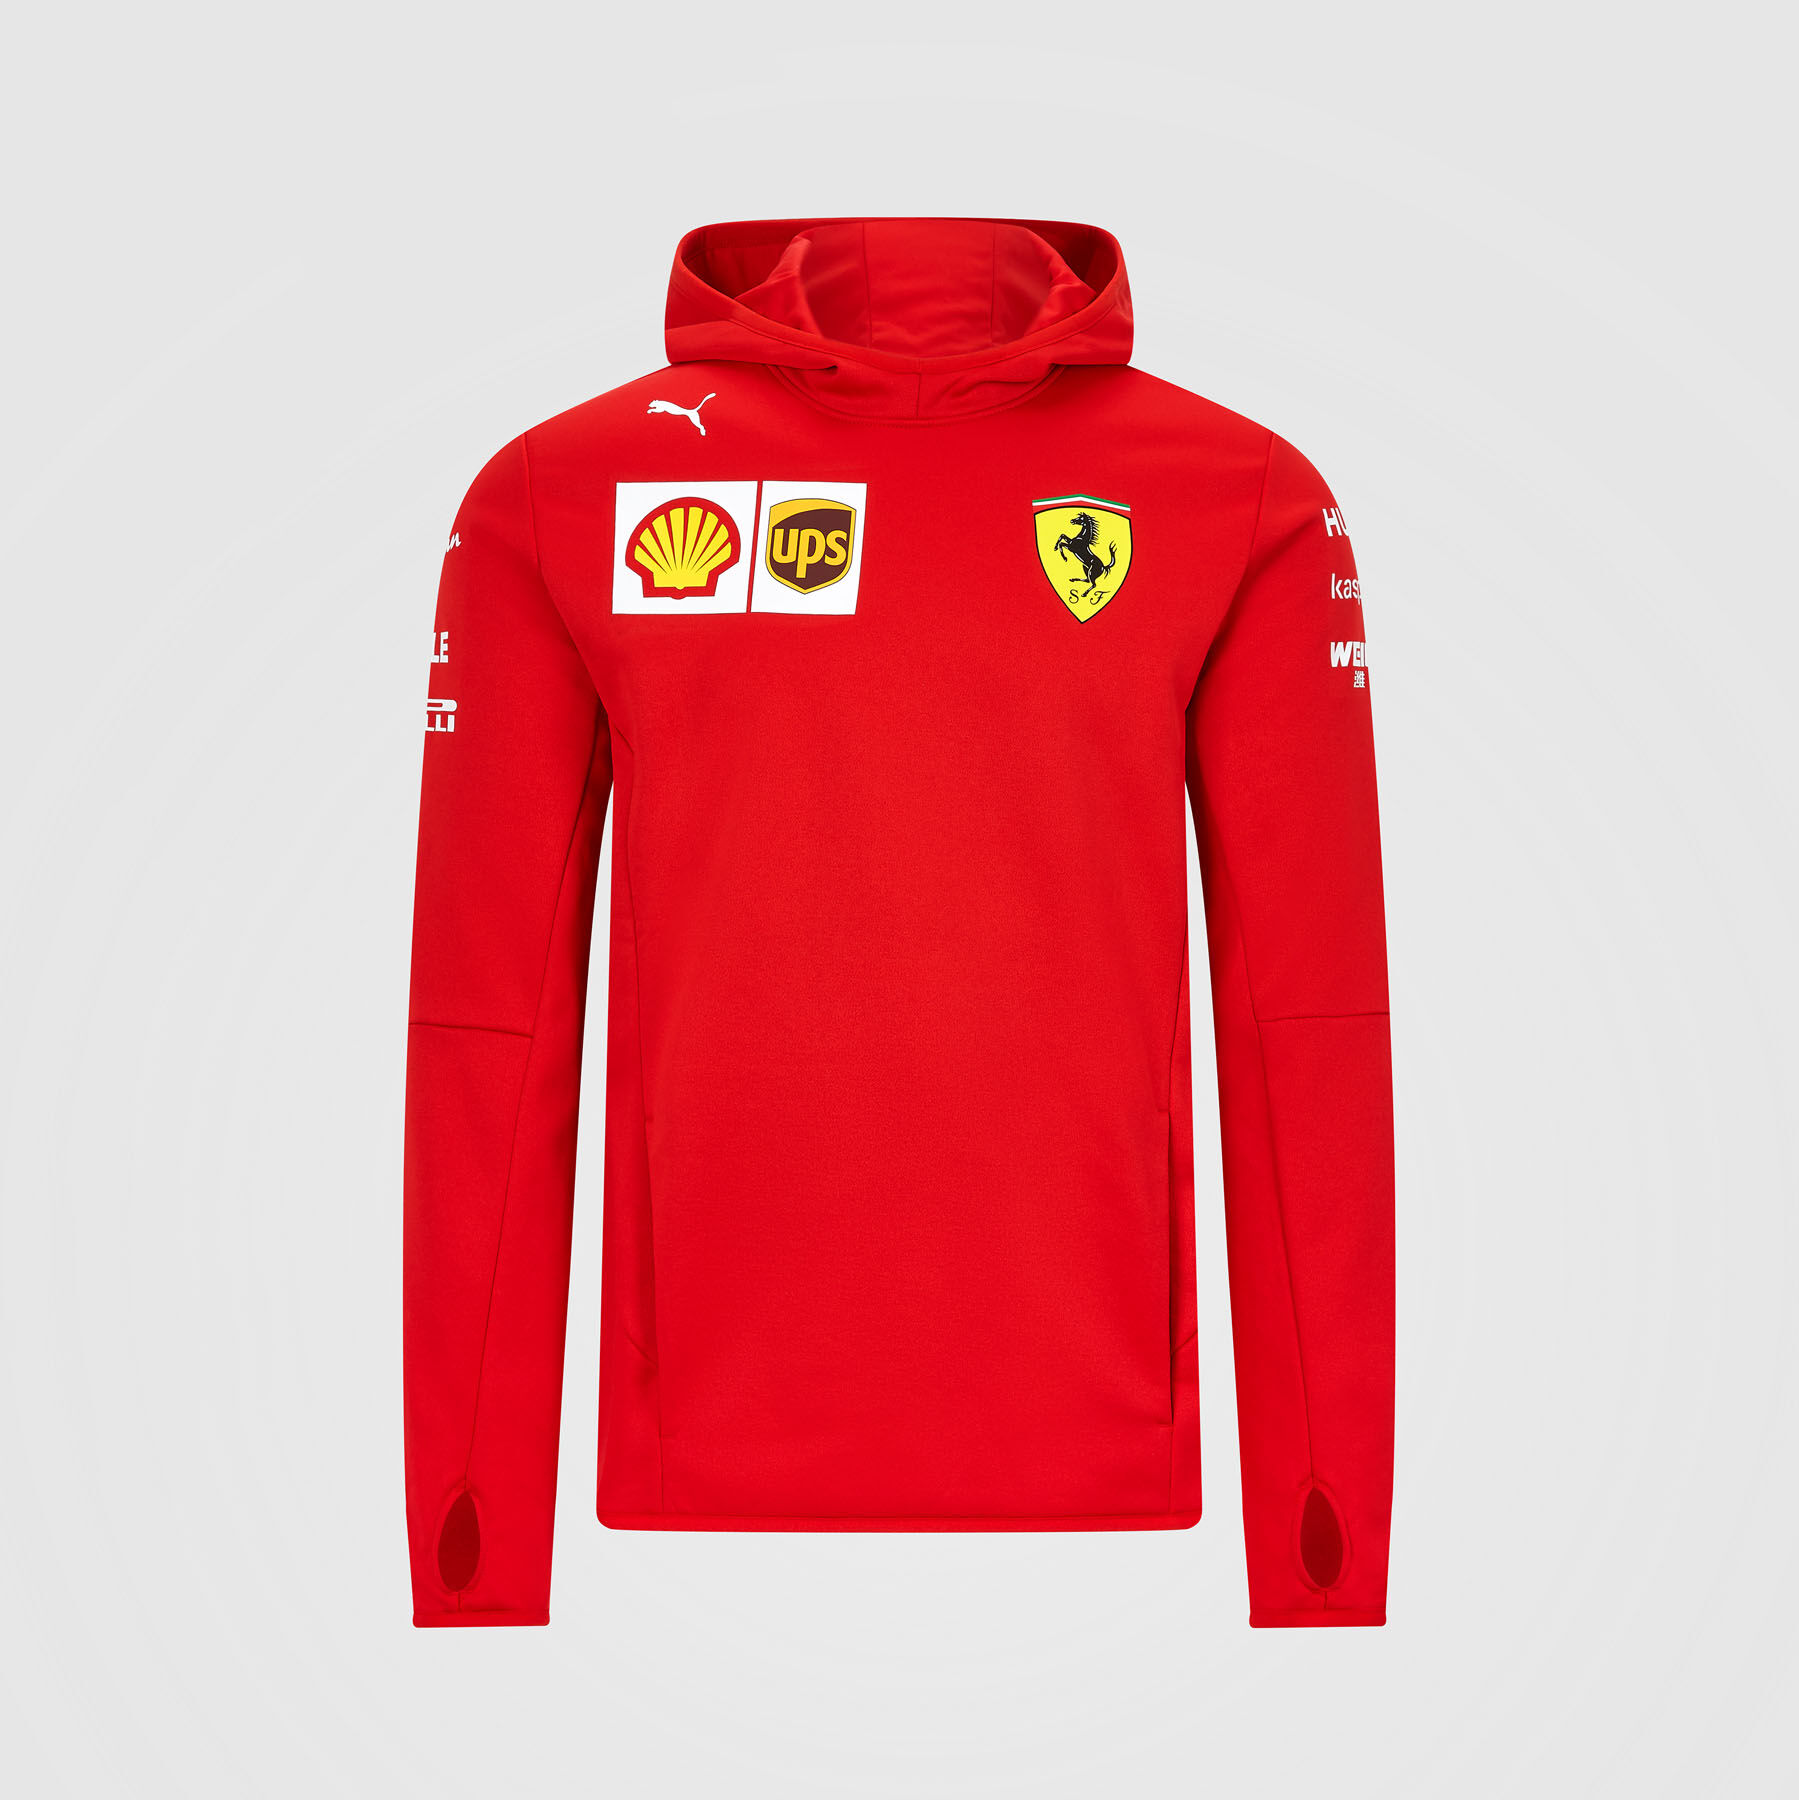 F1 Jackets For Sale - Streaming F1 2020